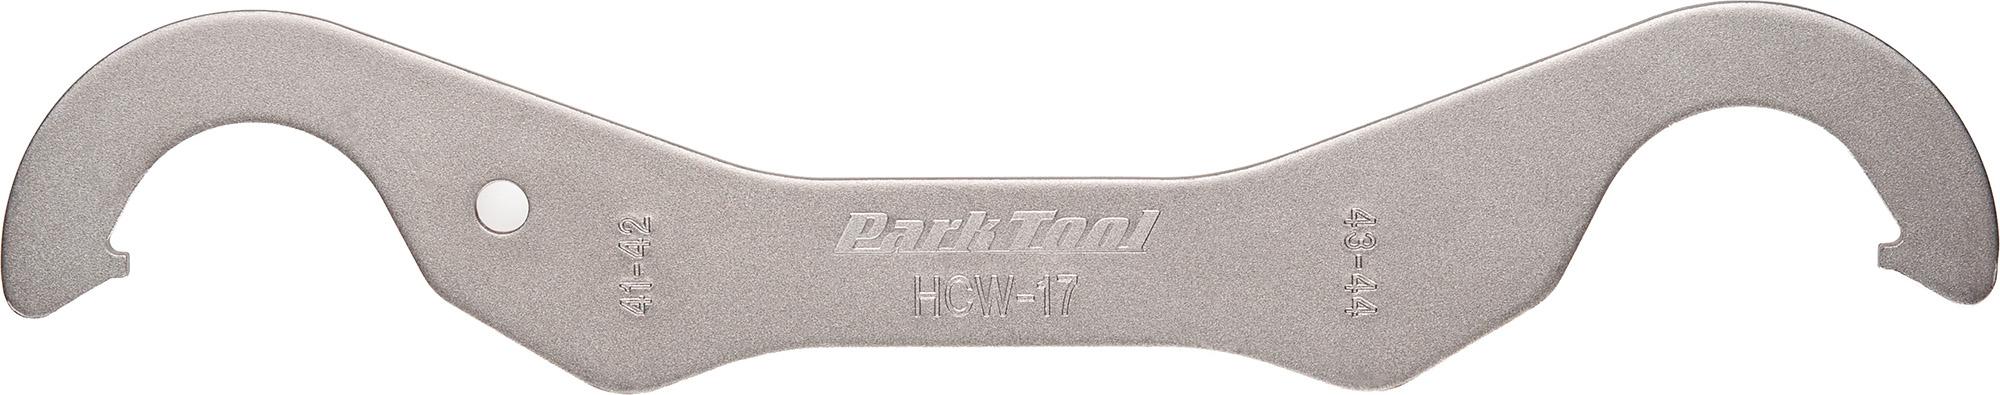 Park Tool Fixed-gear Lockring Wrench (hcw-17)  Silver